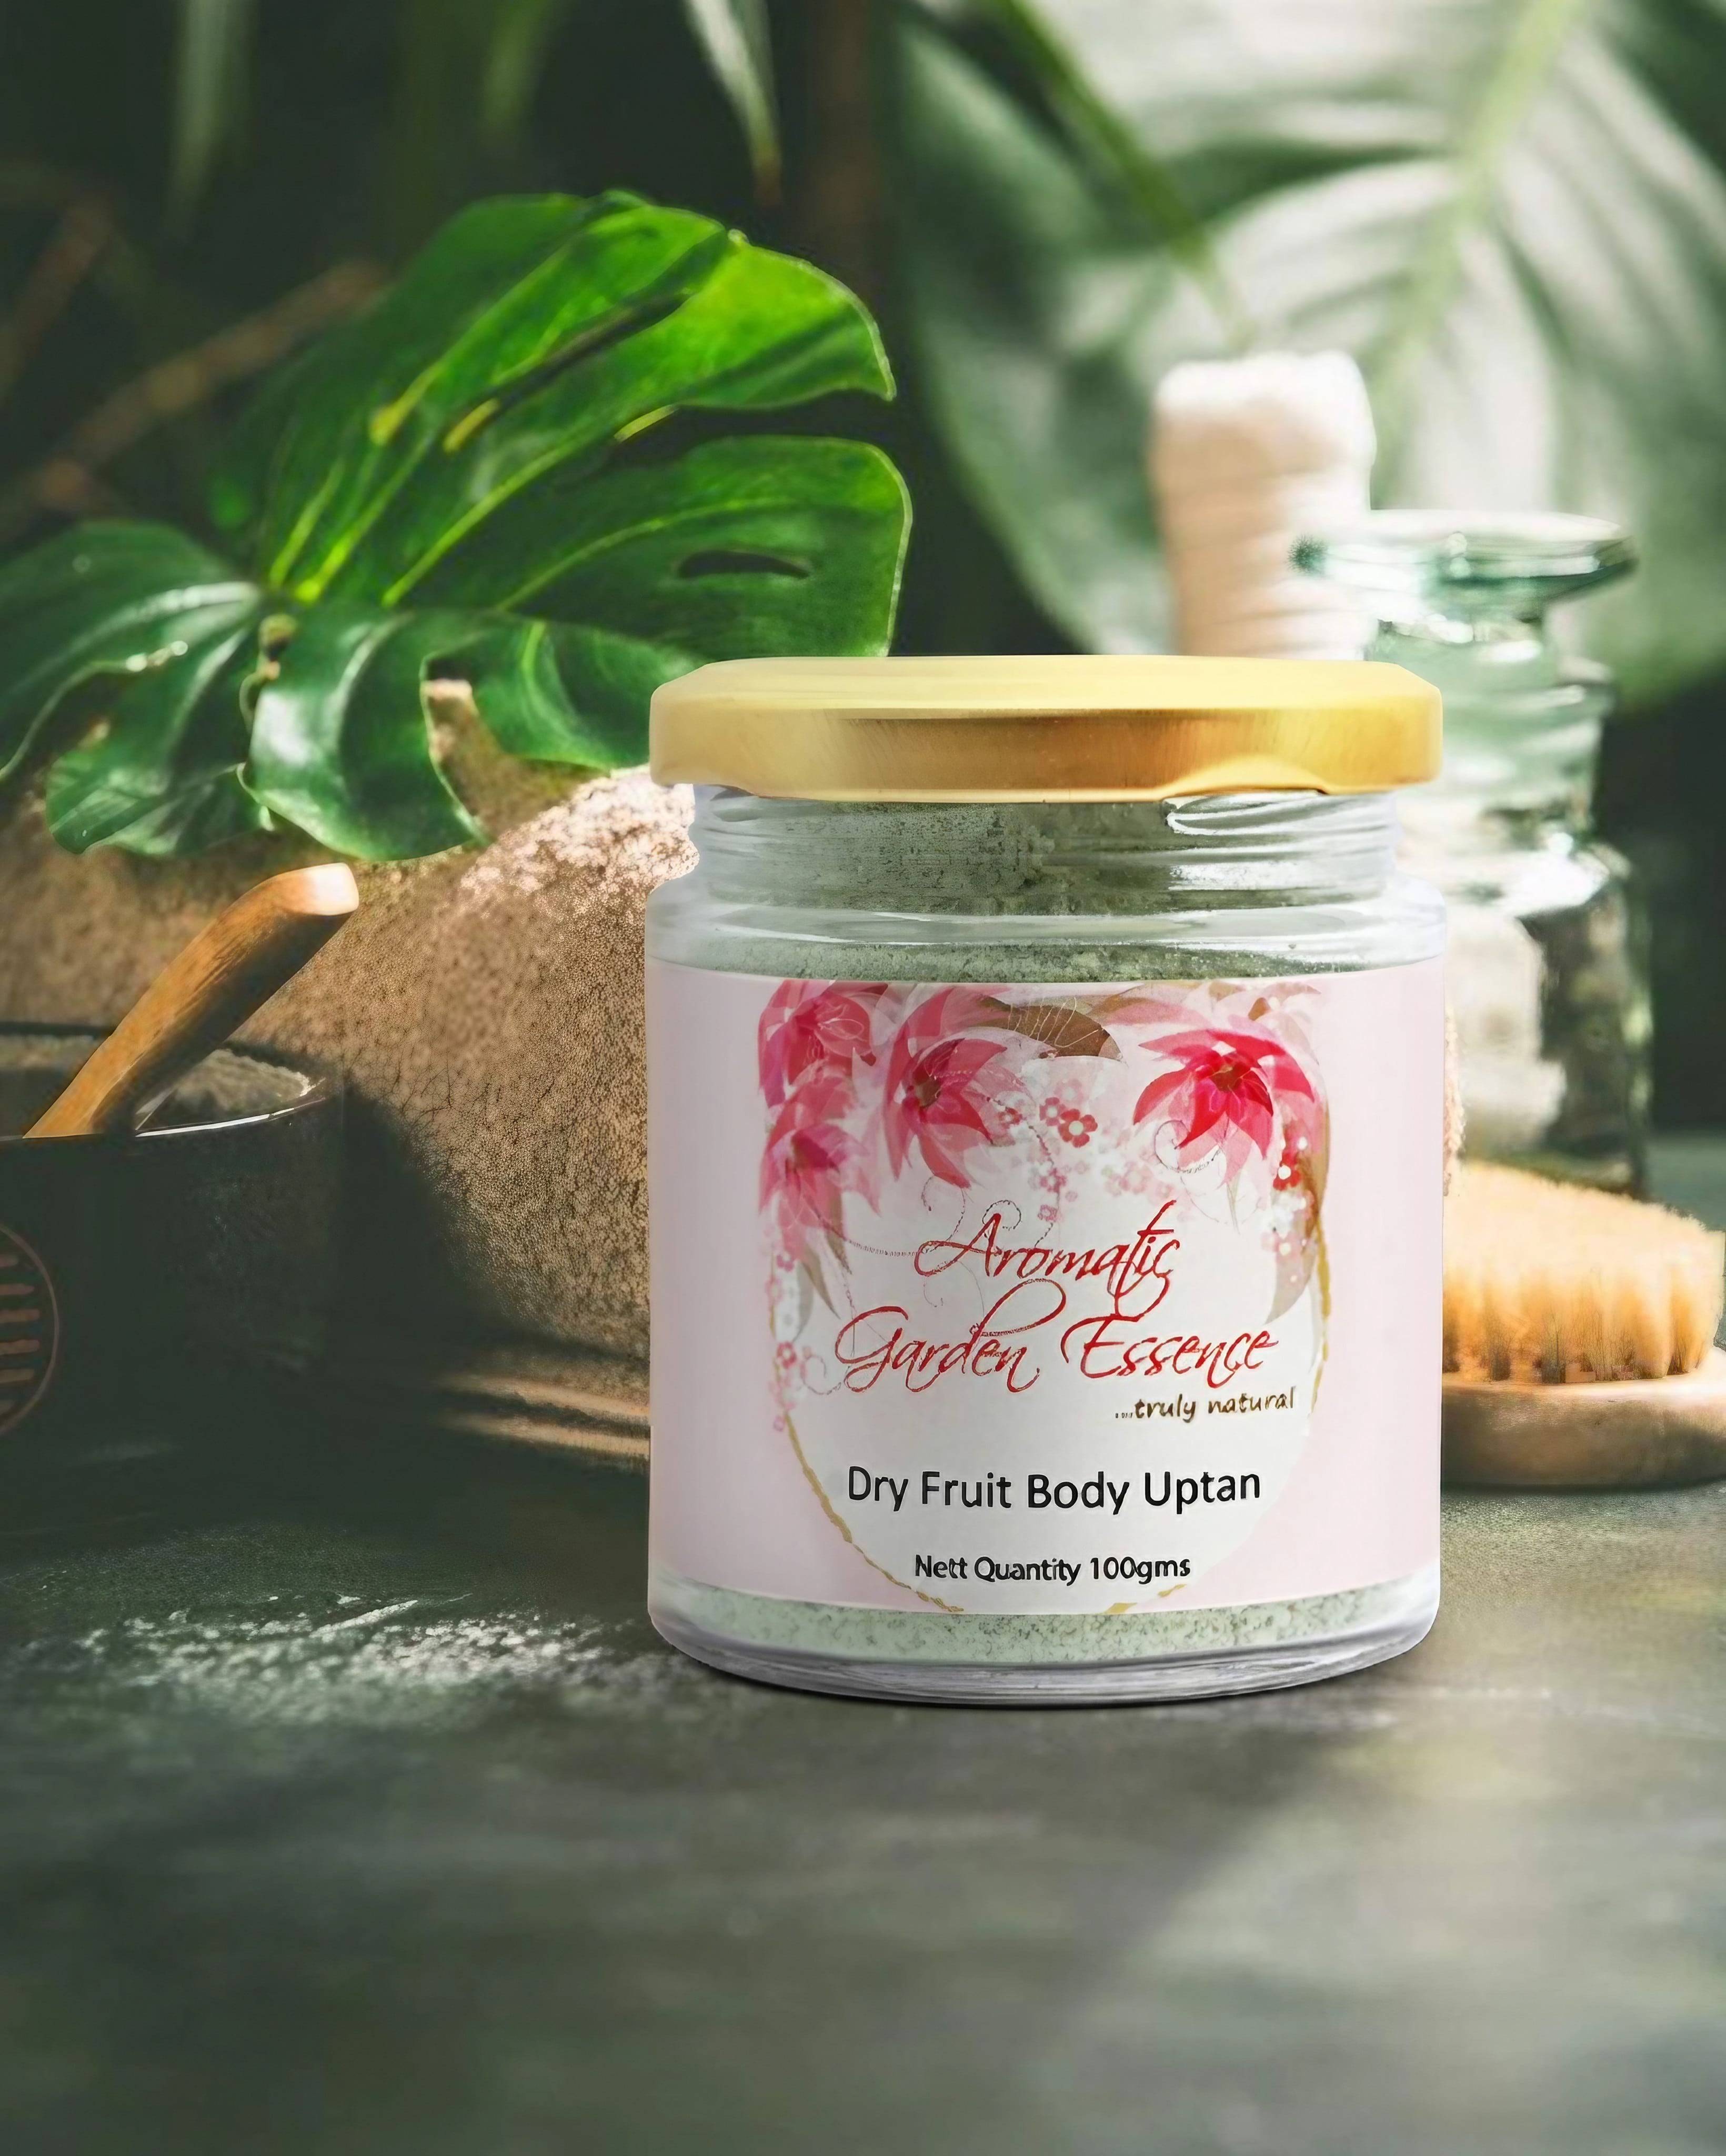 AGE Dry Fruit Body Uptan jar for radiant skin with a decorative plant and towel in the background